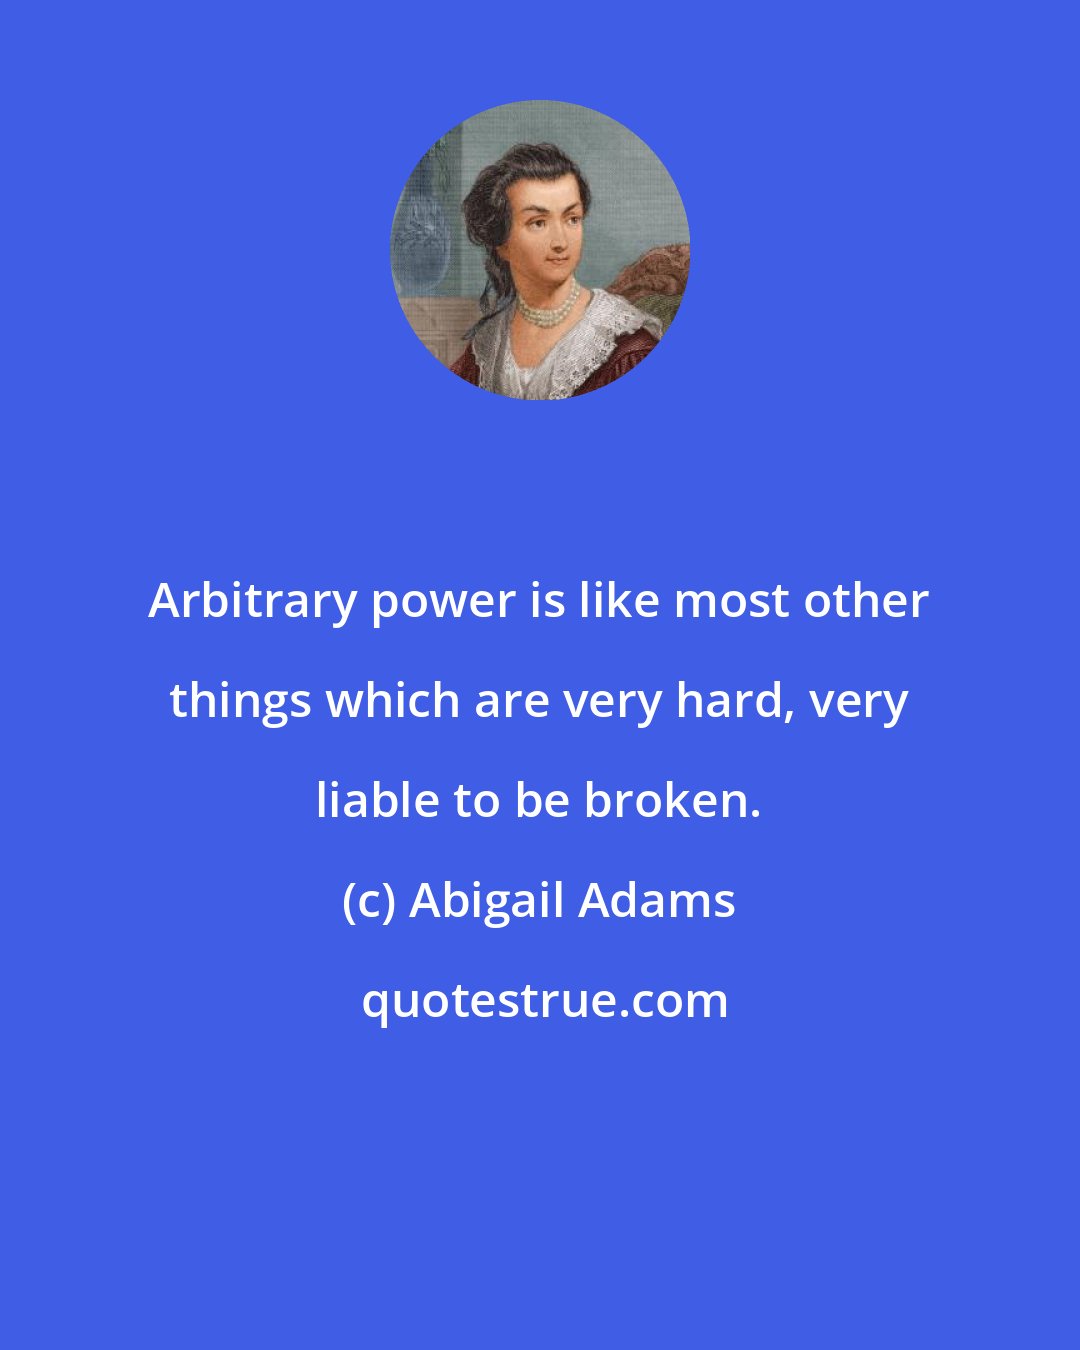 Abigail Adams: Arbitrary power is like most other things which are very hard, very liable to be broken.